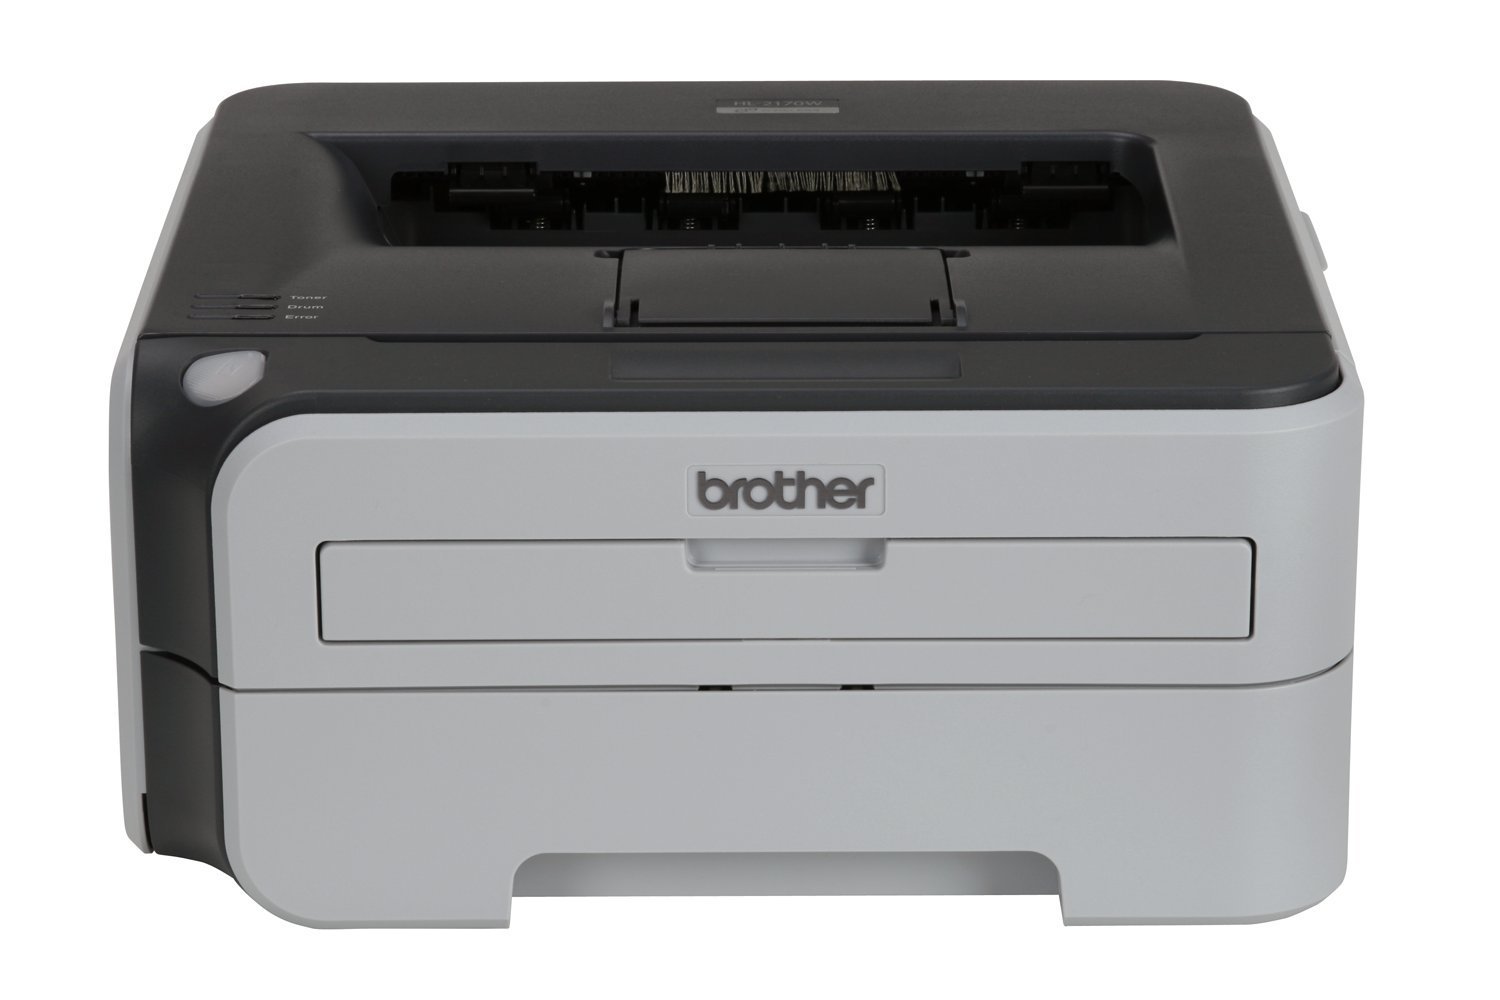 Brother hl-2170w installation software for mac free